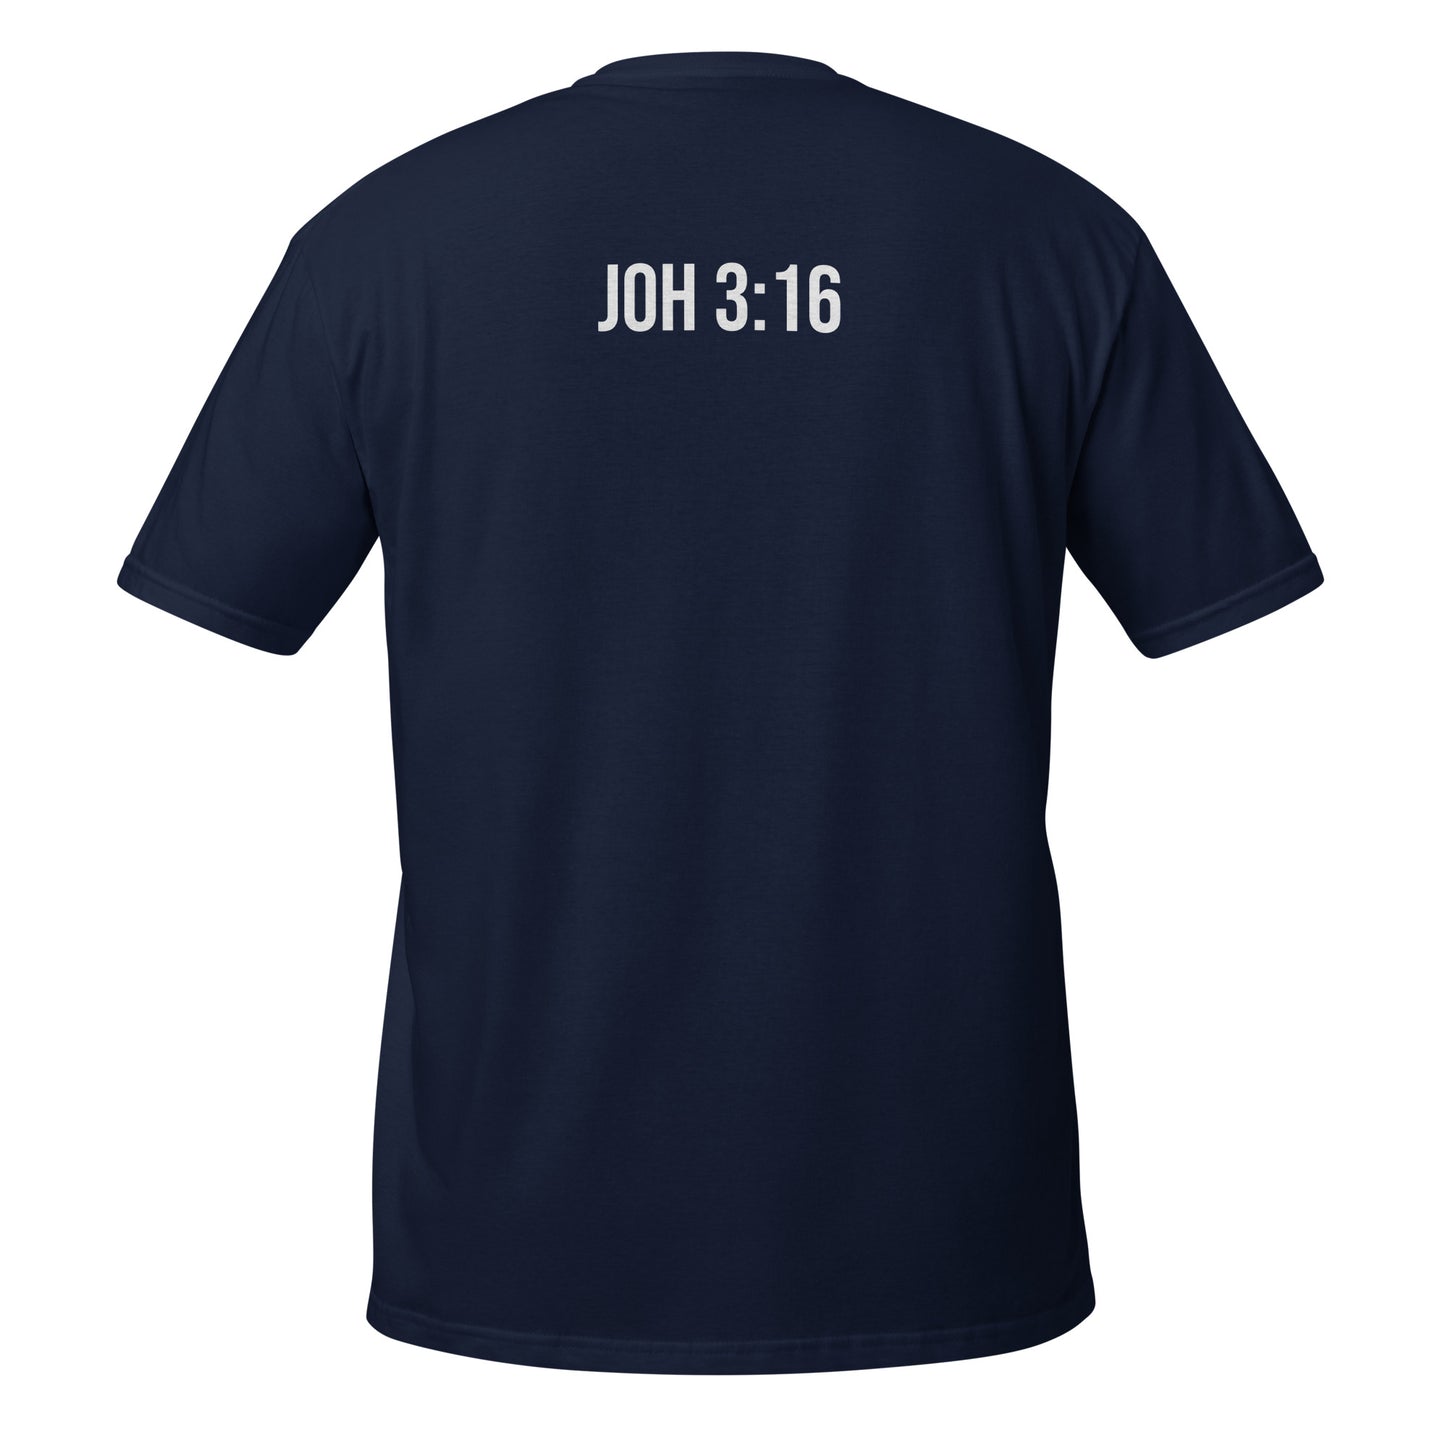 "JOH 3:16" unisex t-shirt with back print